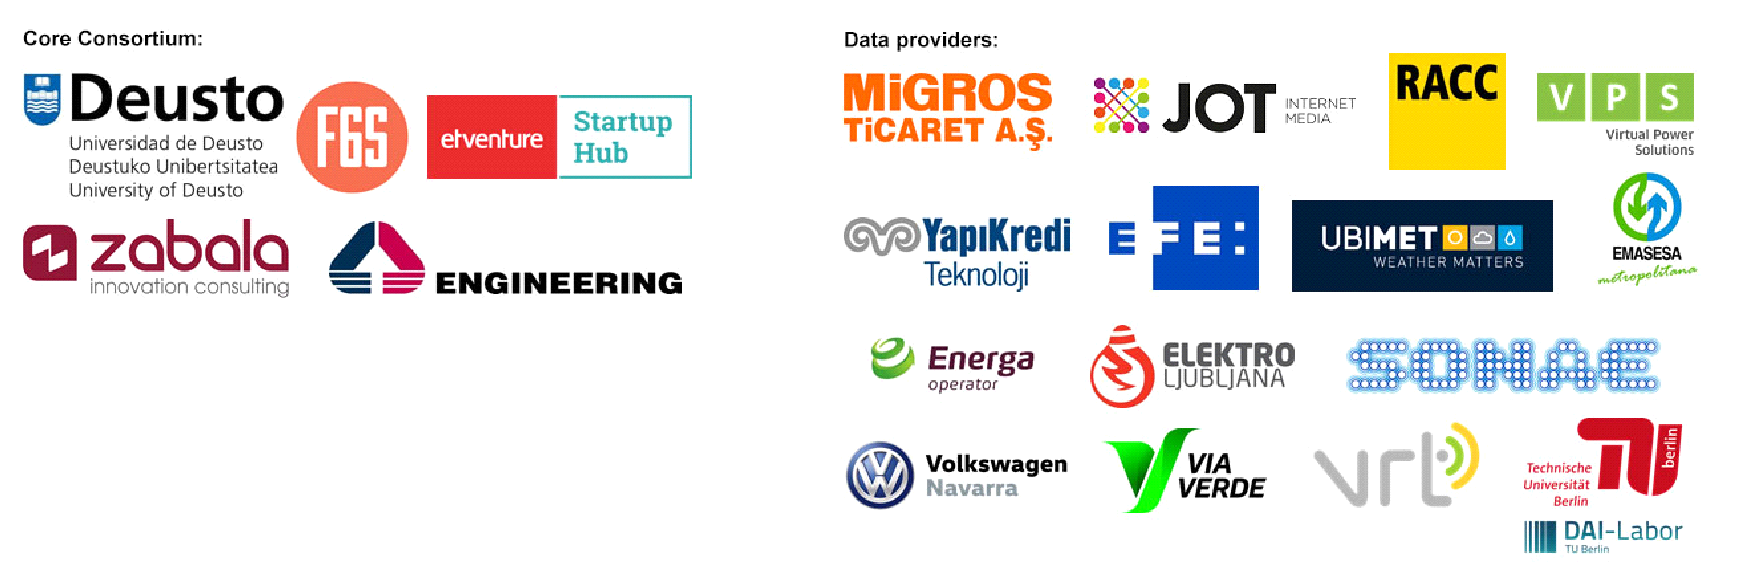 ZYLK Industry has been selected as one of the brightest “Big Data” startups in Europe